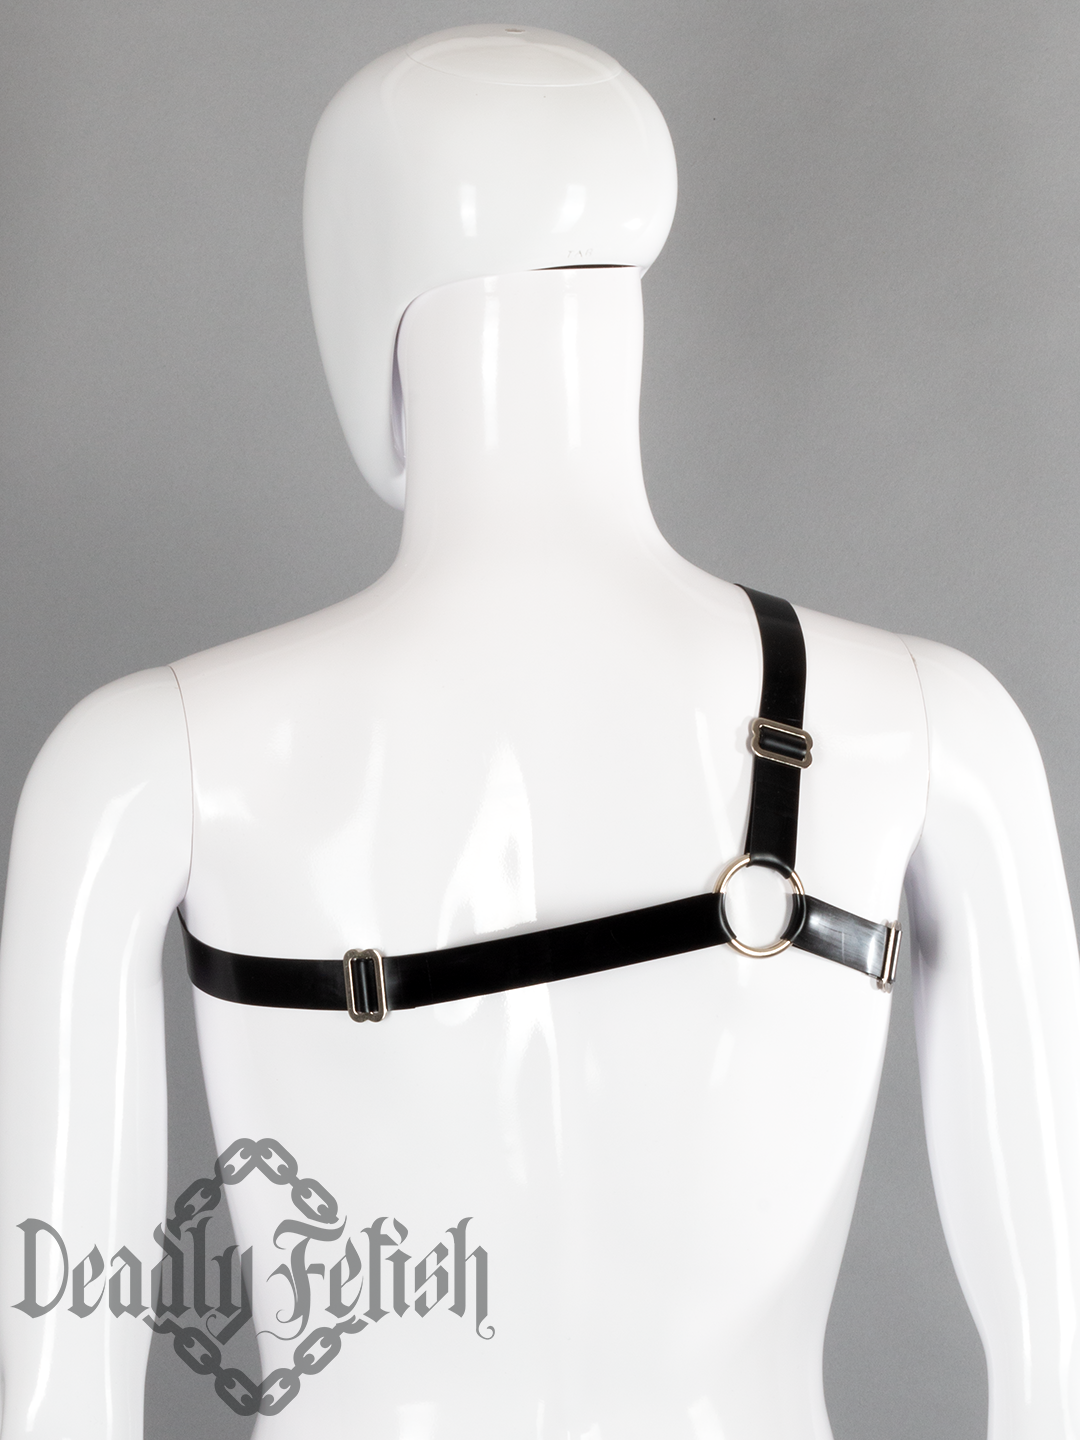 Deadly Fetish Made-to-Order Latex: Basic Harness #29